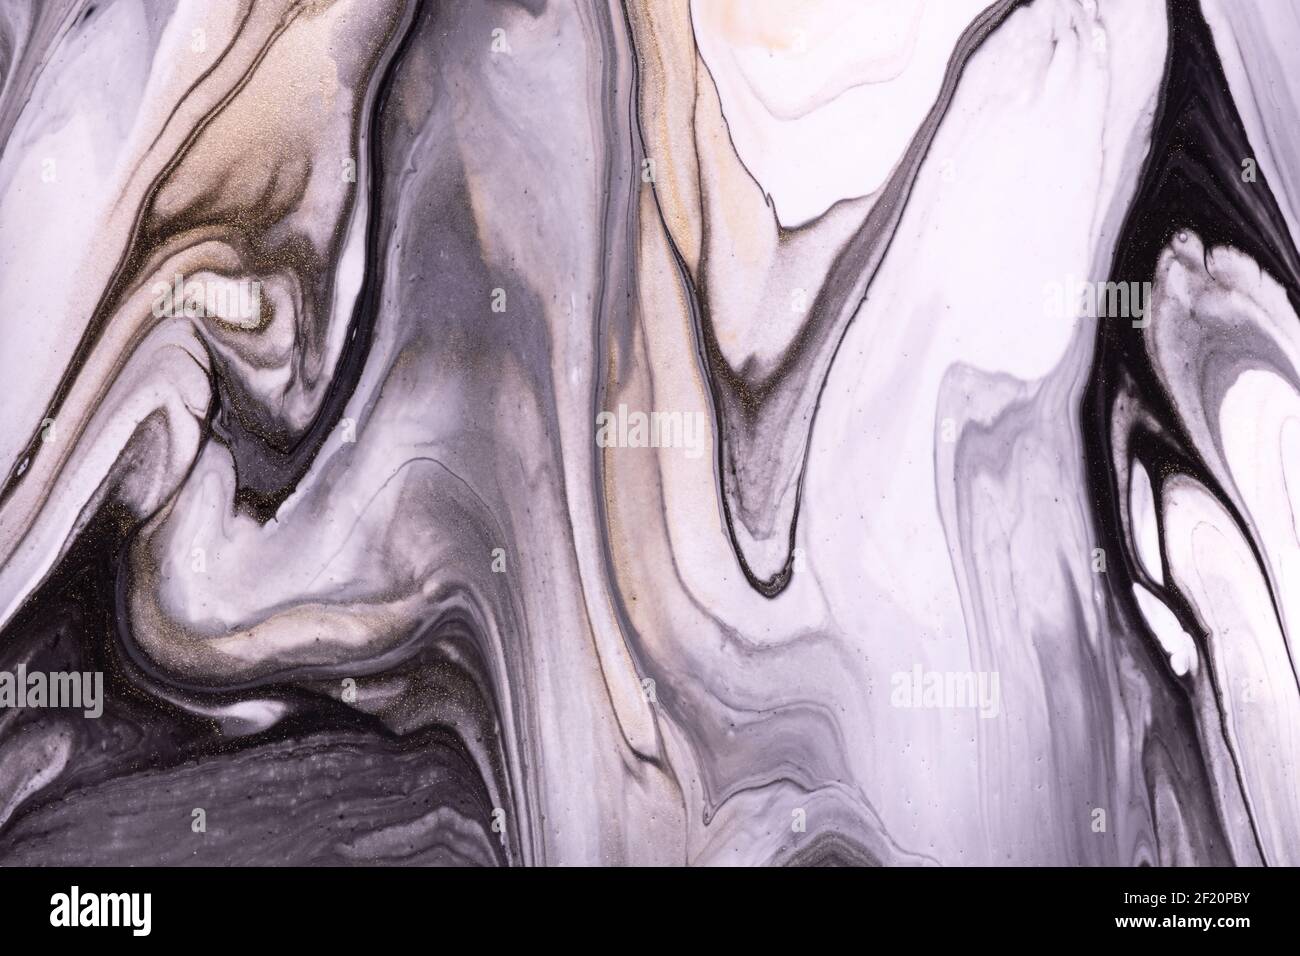 Abstract black and white watercolor or acrylic paint background. Black and white  paint splash texture can be used for any design Stock Photo - Alamy